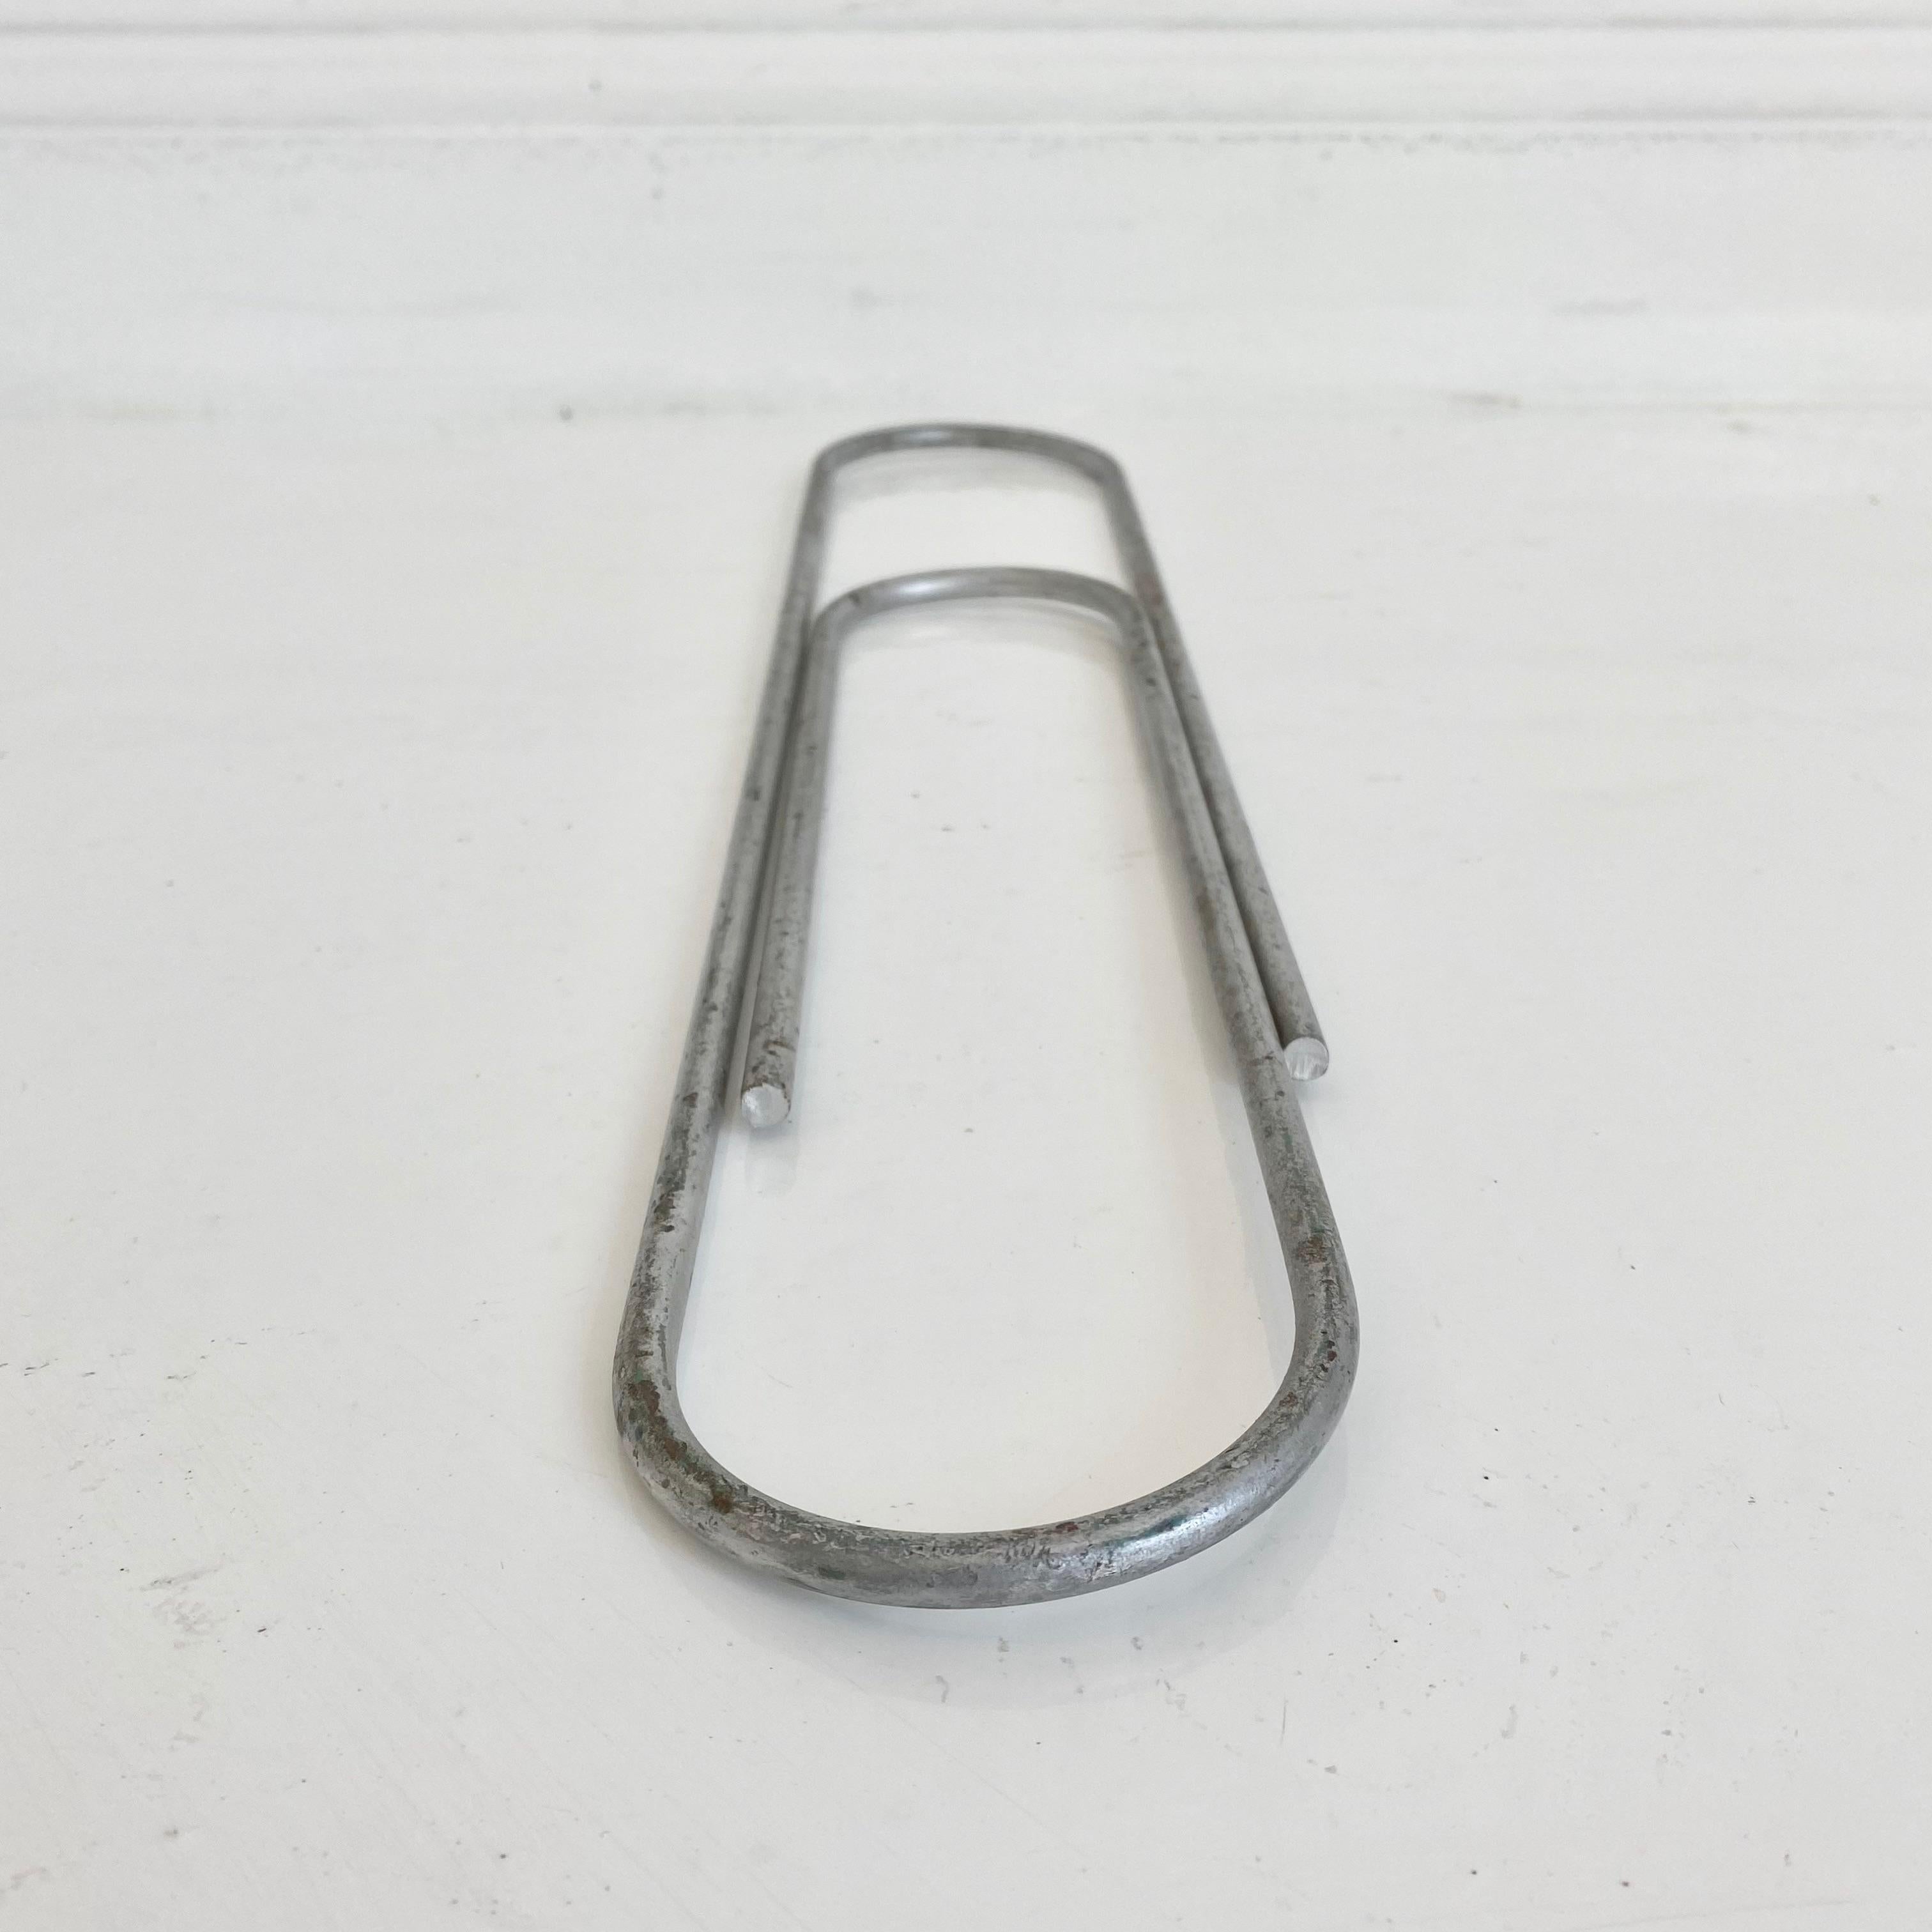 Taiwanese Monumental Metal Paper Clip For Sale